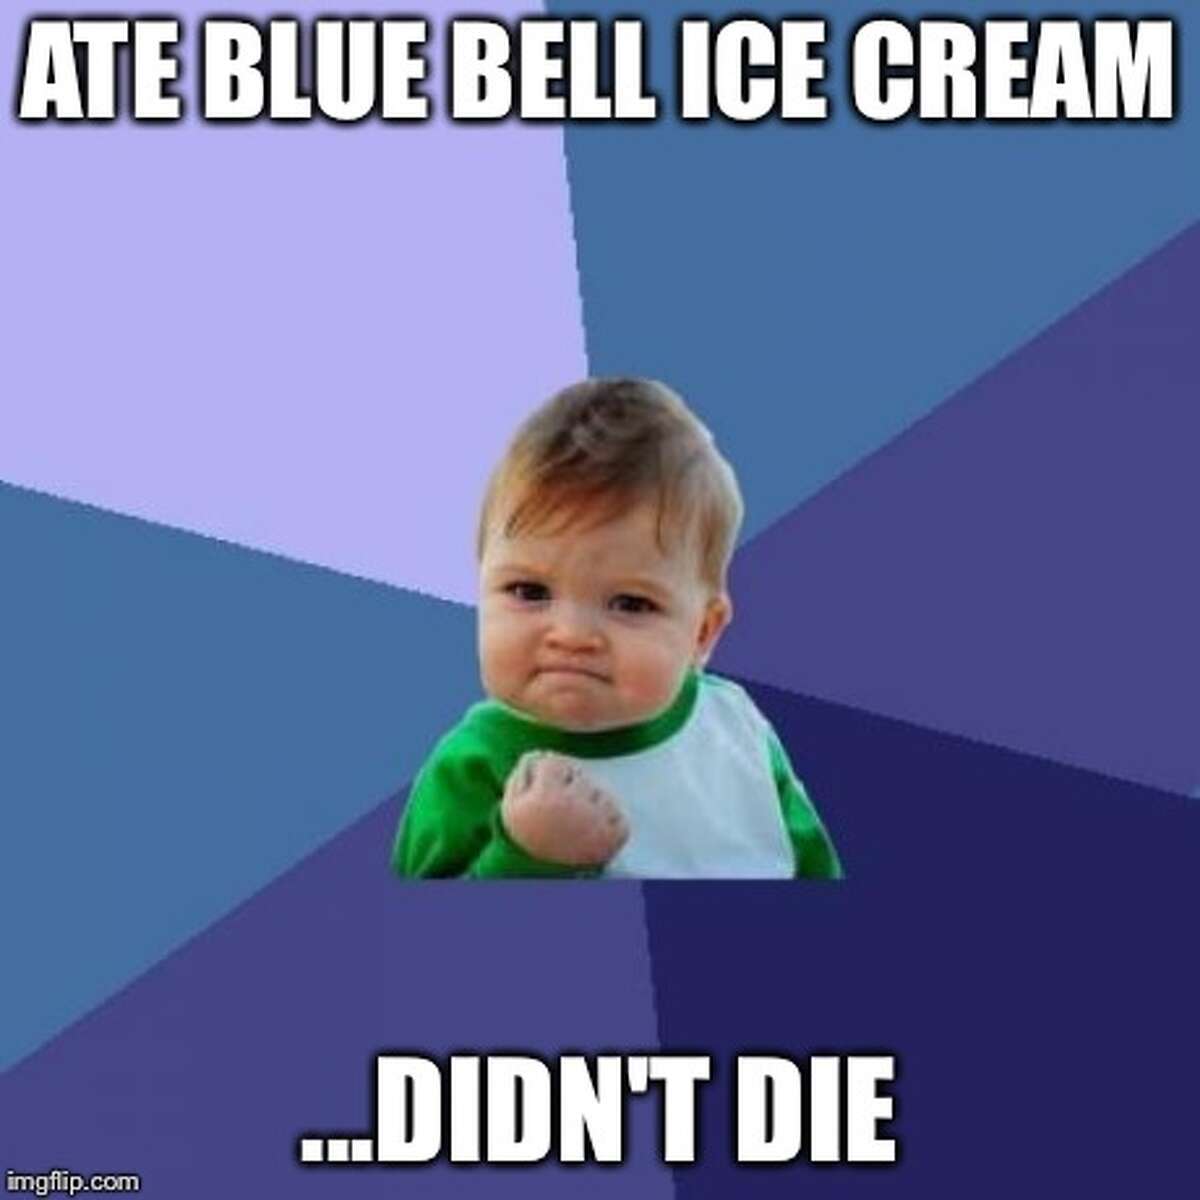 In the wake of recent recalls the internet responded with resolute support for Blue Bell Ice Cream, with memes and photos circulating around Twitter, Facebook, and Instagram.